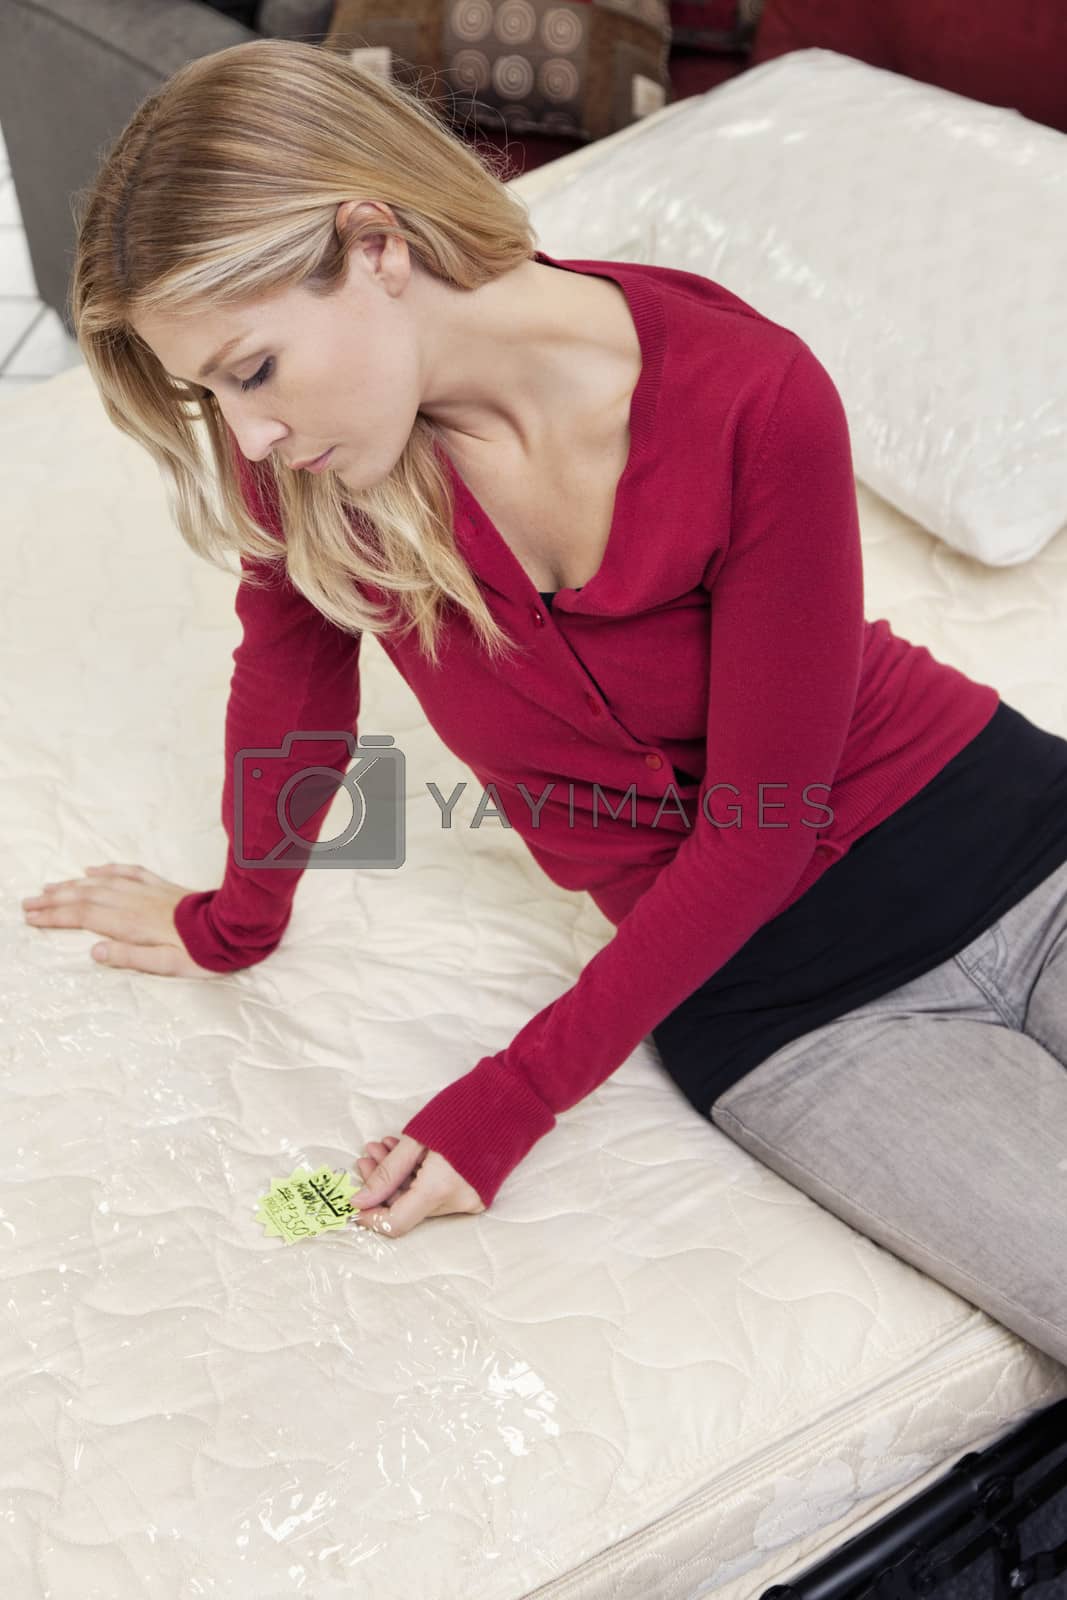 Royalty free image of Young woman sitting mattress while looking at price tag by moodboard